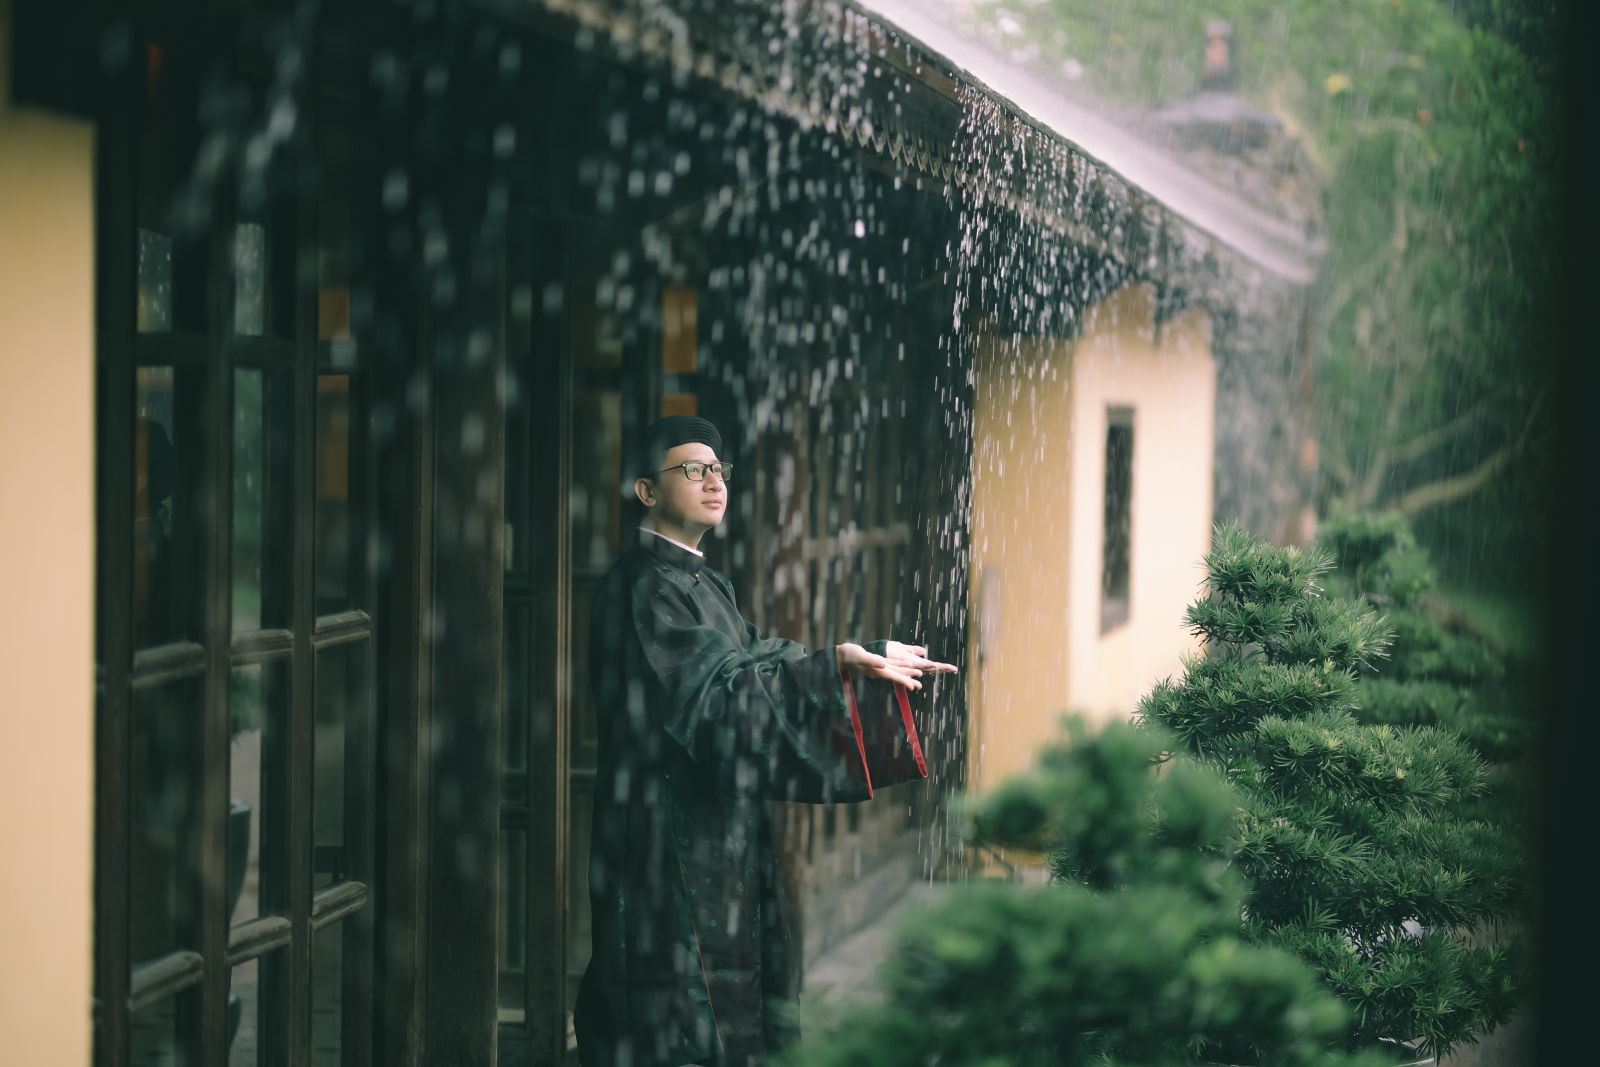 A tourist from Ho Chi Minh City to the Imperial Citadel experiences the rain of Hue